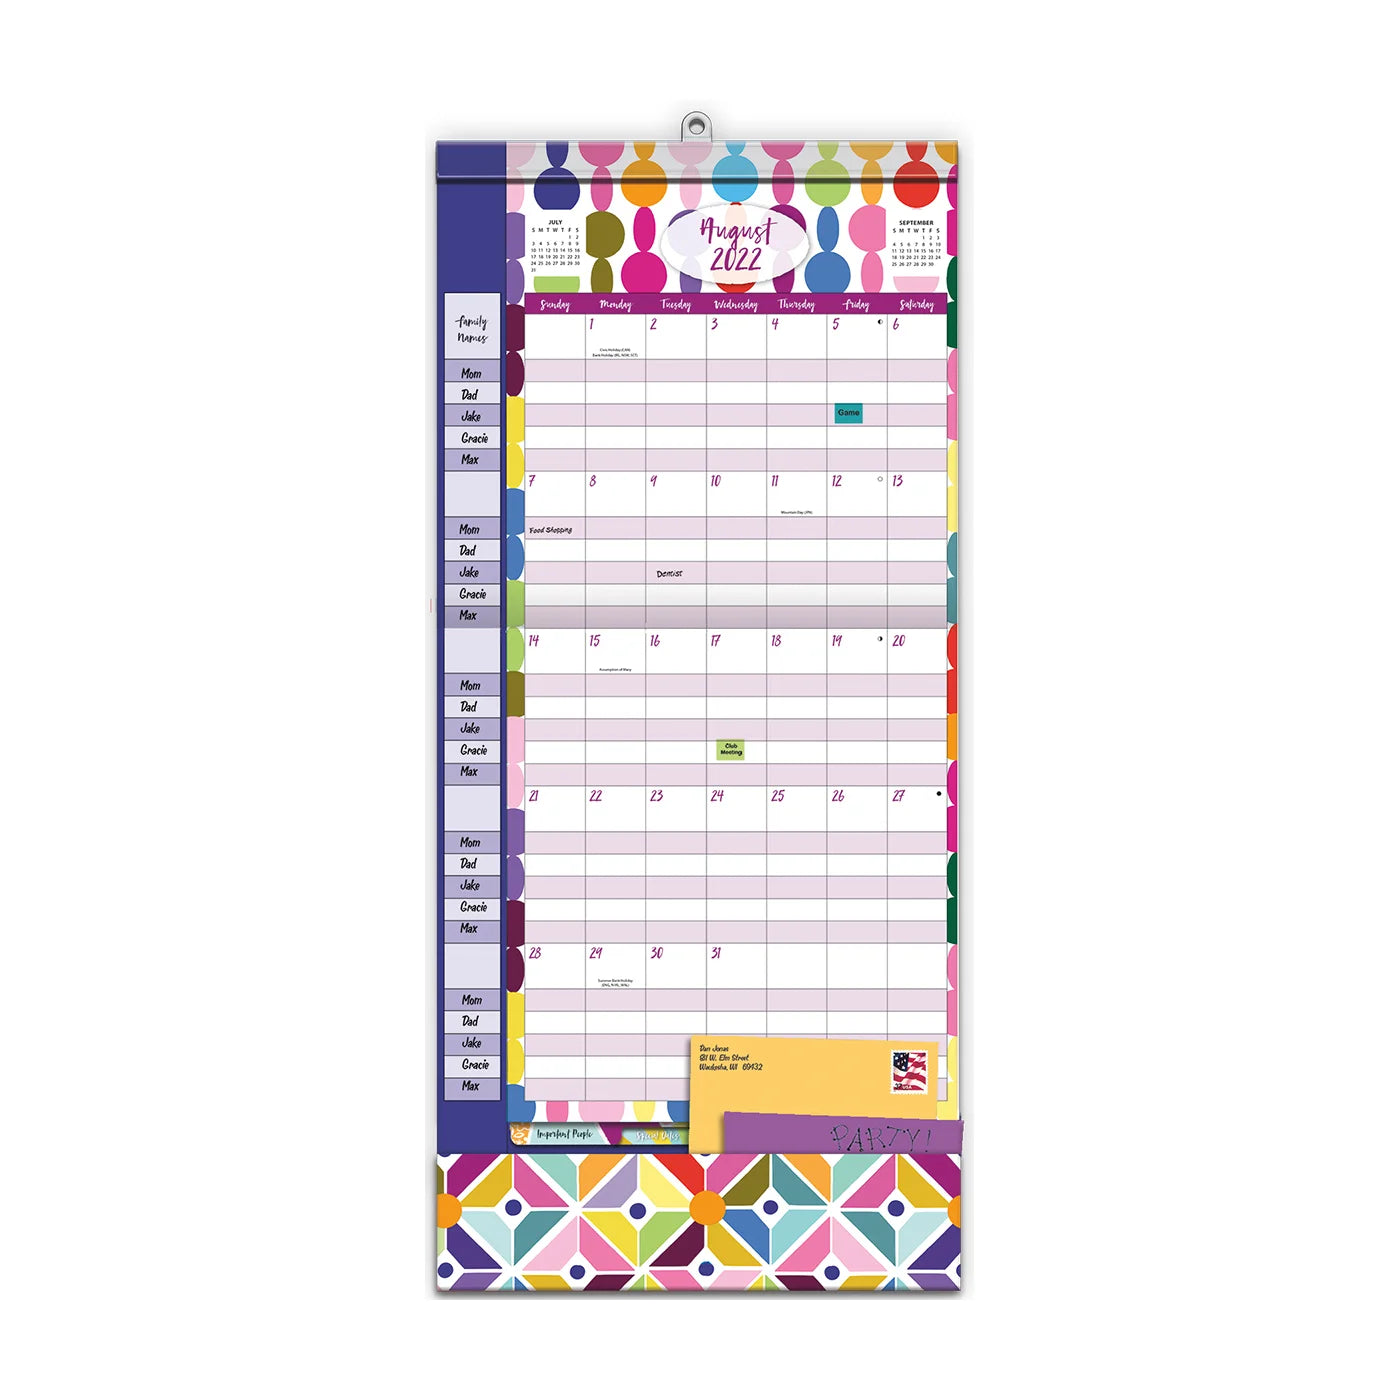 2023 LANG Journey of the Heart By Eliza Todd - Plan-it Magnetic Square Wall Calendar